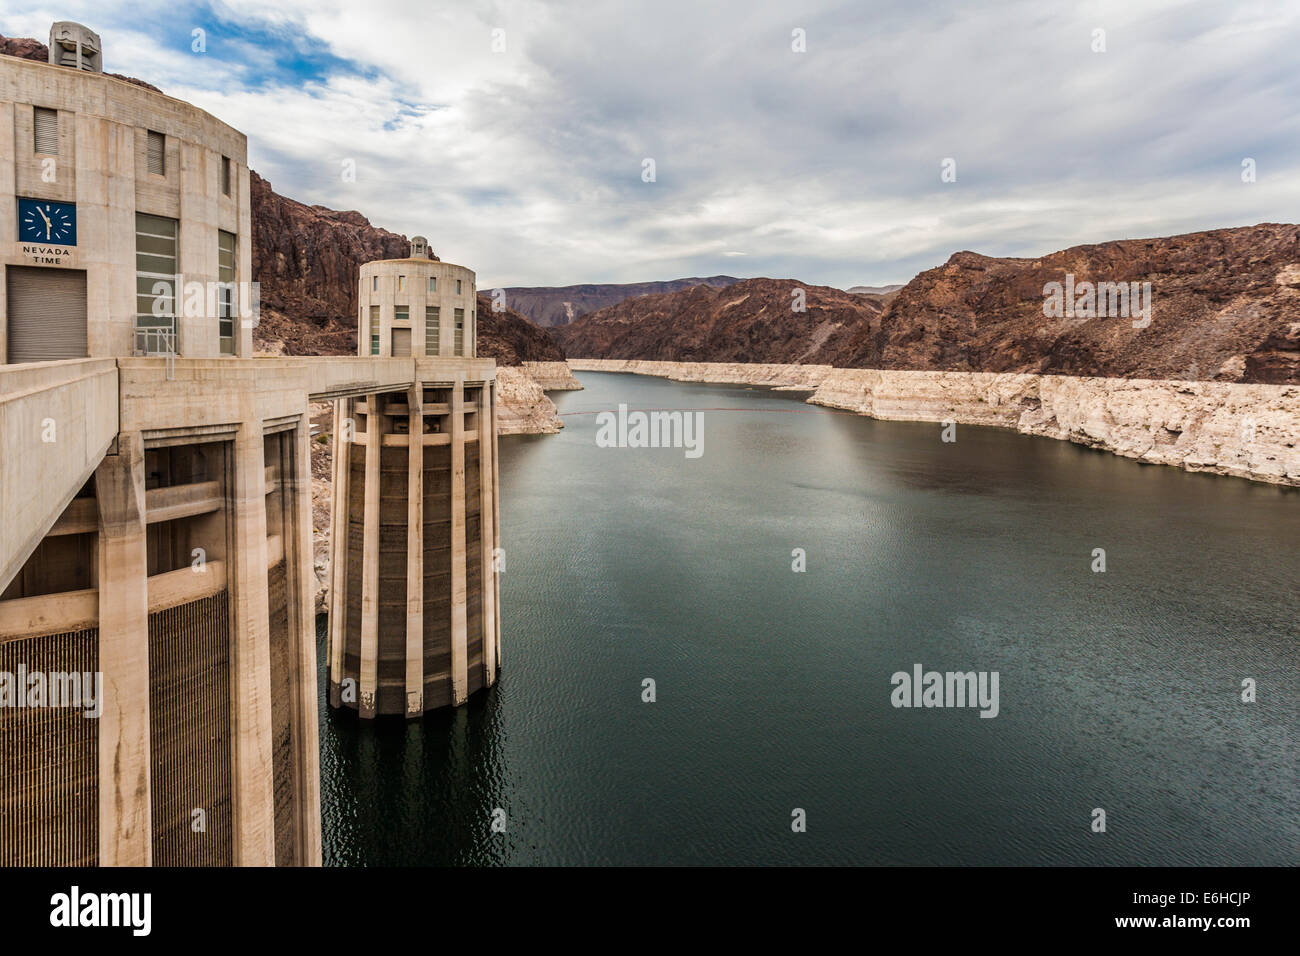 Water intake tower in Lake Mead at Hoover Dam in the Black Canyon of the Colorado River near Boulder City, Nevada Stock Photo